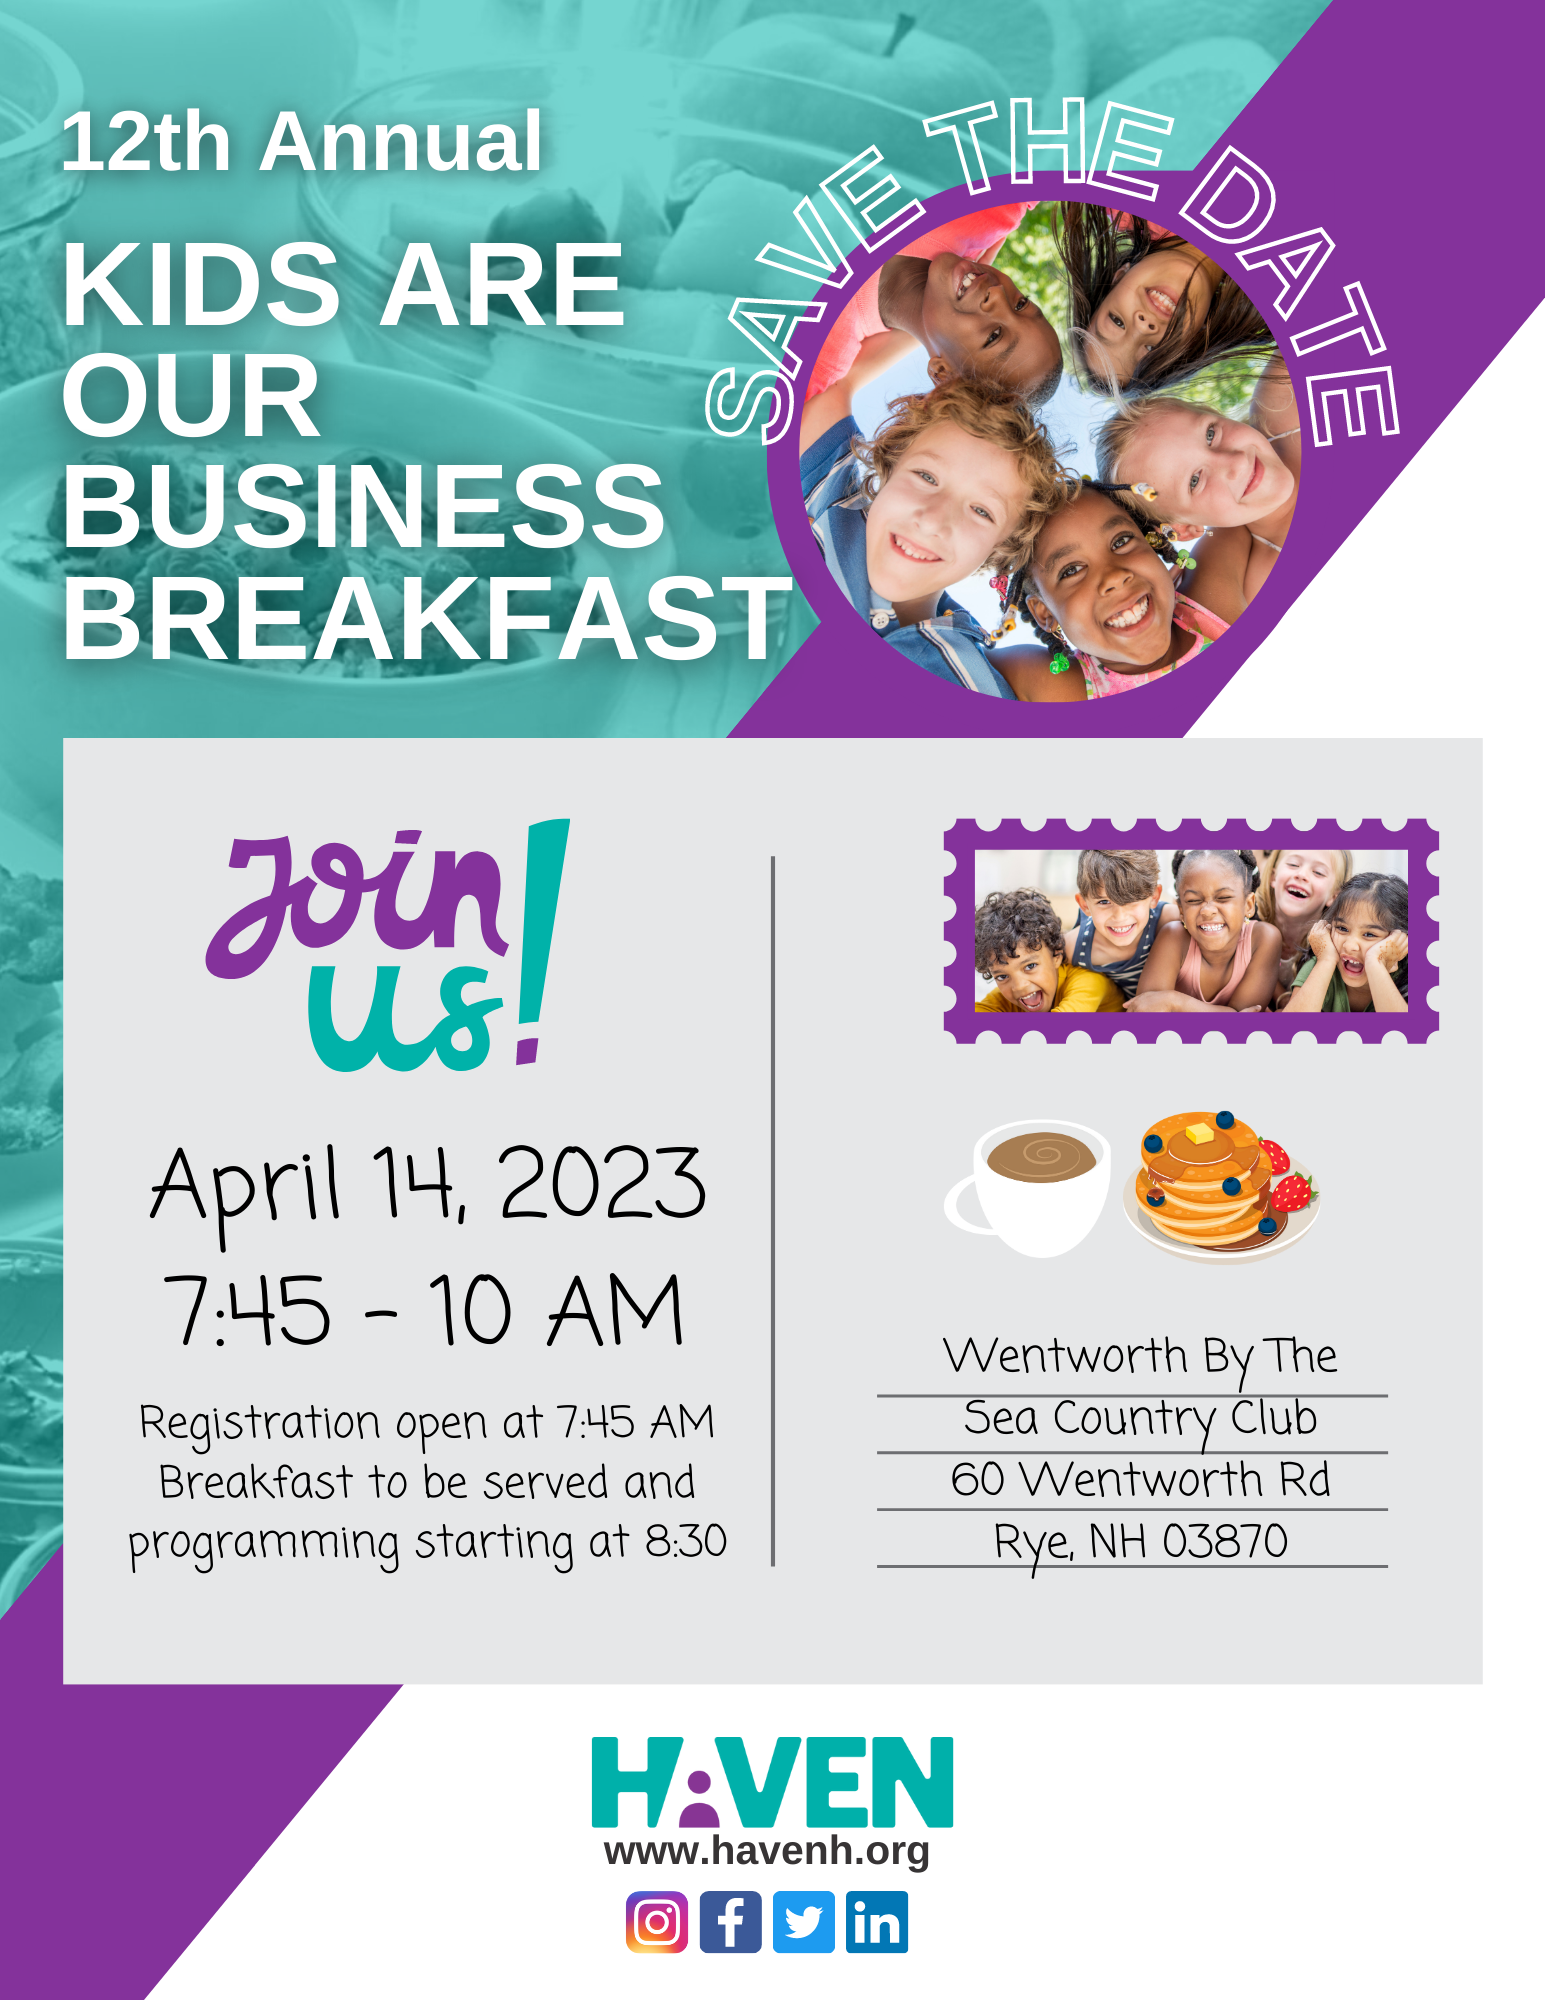 Kids Are Our Business Breakfast Event. April 14, 2023. Registration opens at 7:45 with breakfast, networking and programming beginning at 8:30 AM.